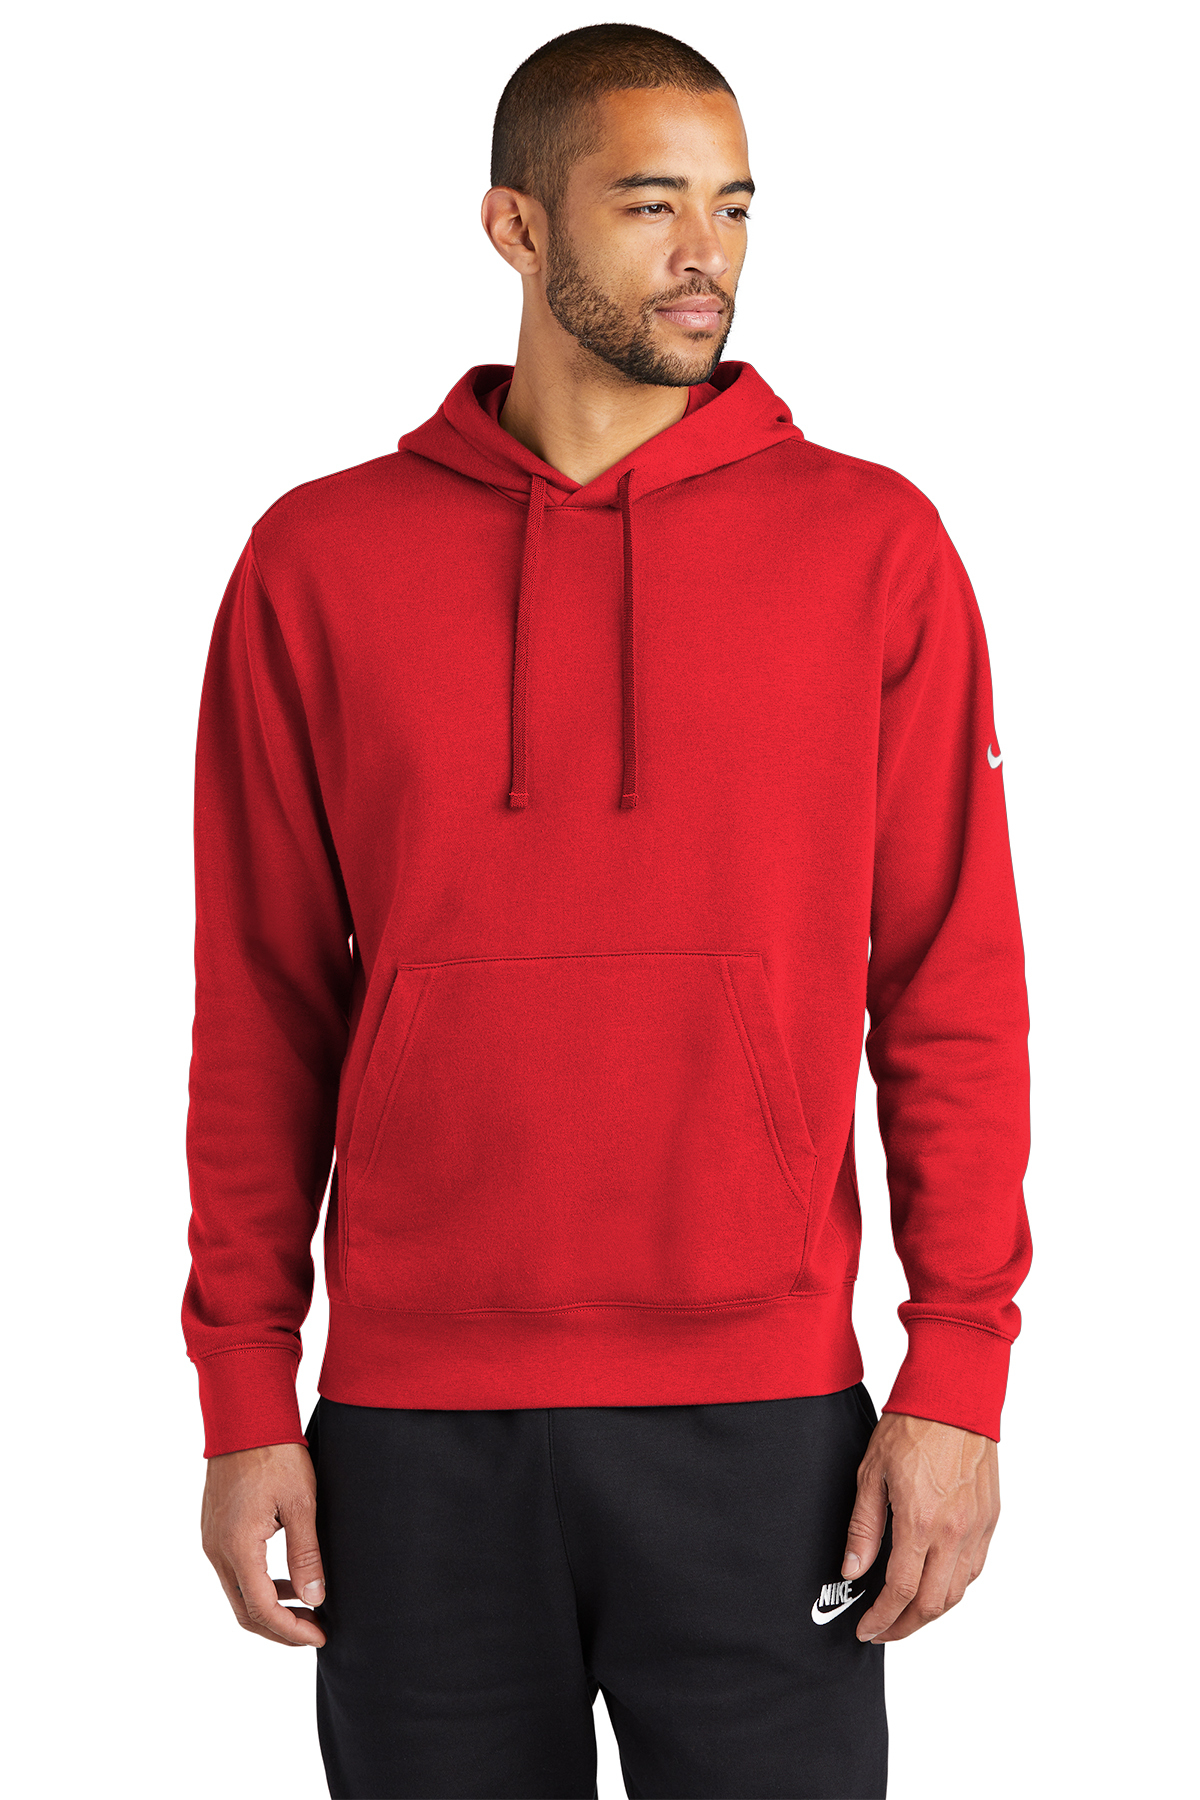 BRUSHED JERSEY PULLOVER HOODIE